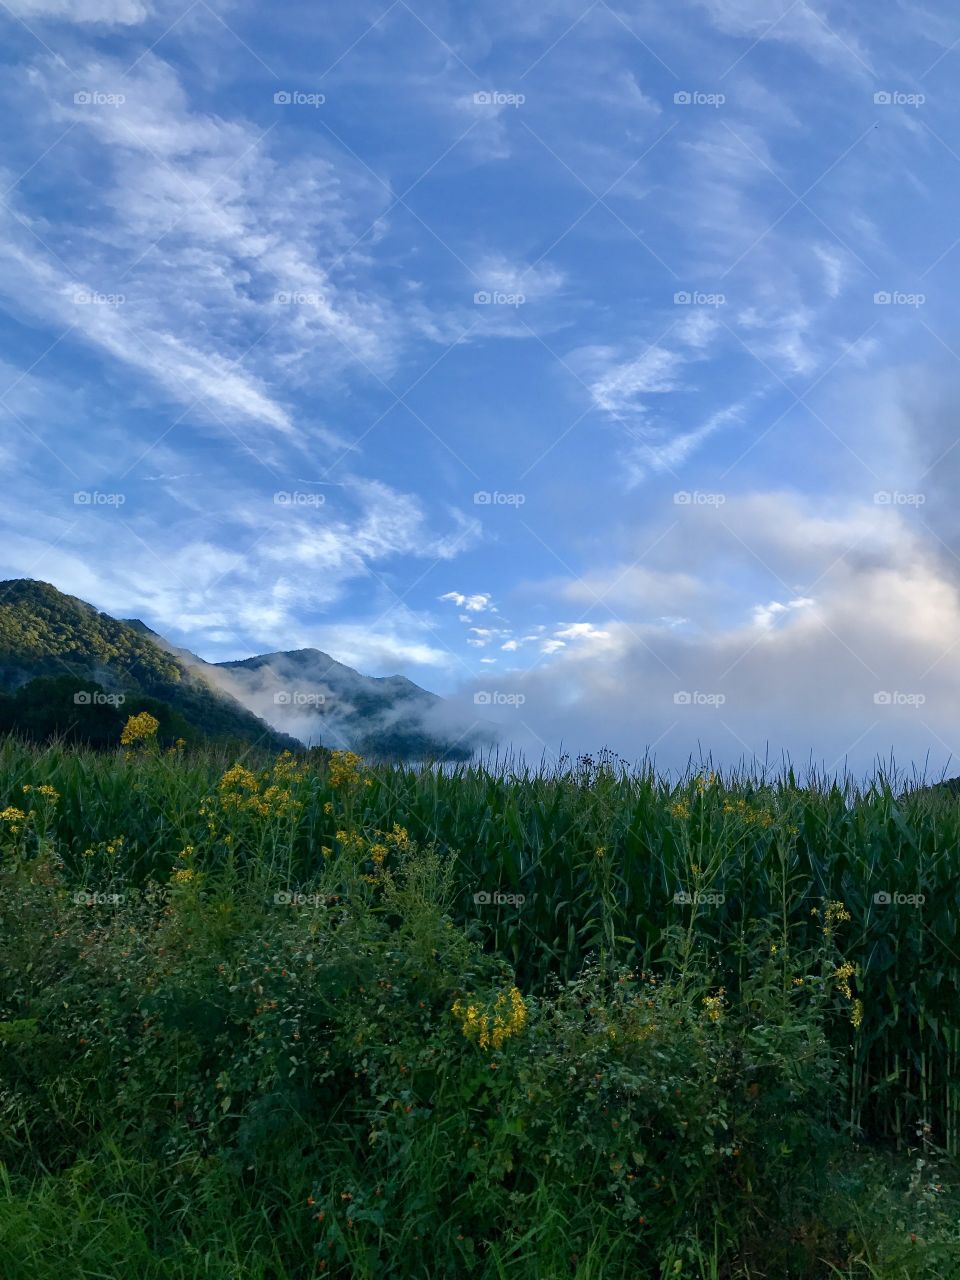 Corn fields and clouds 